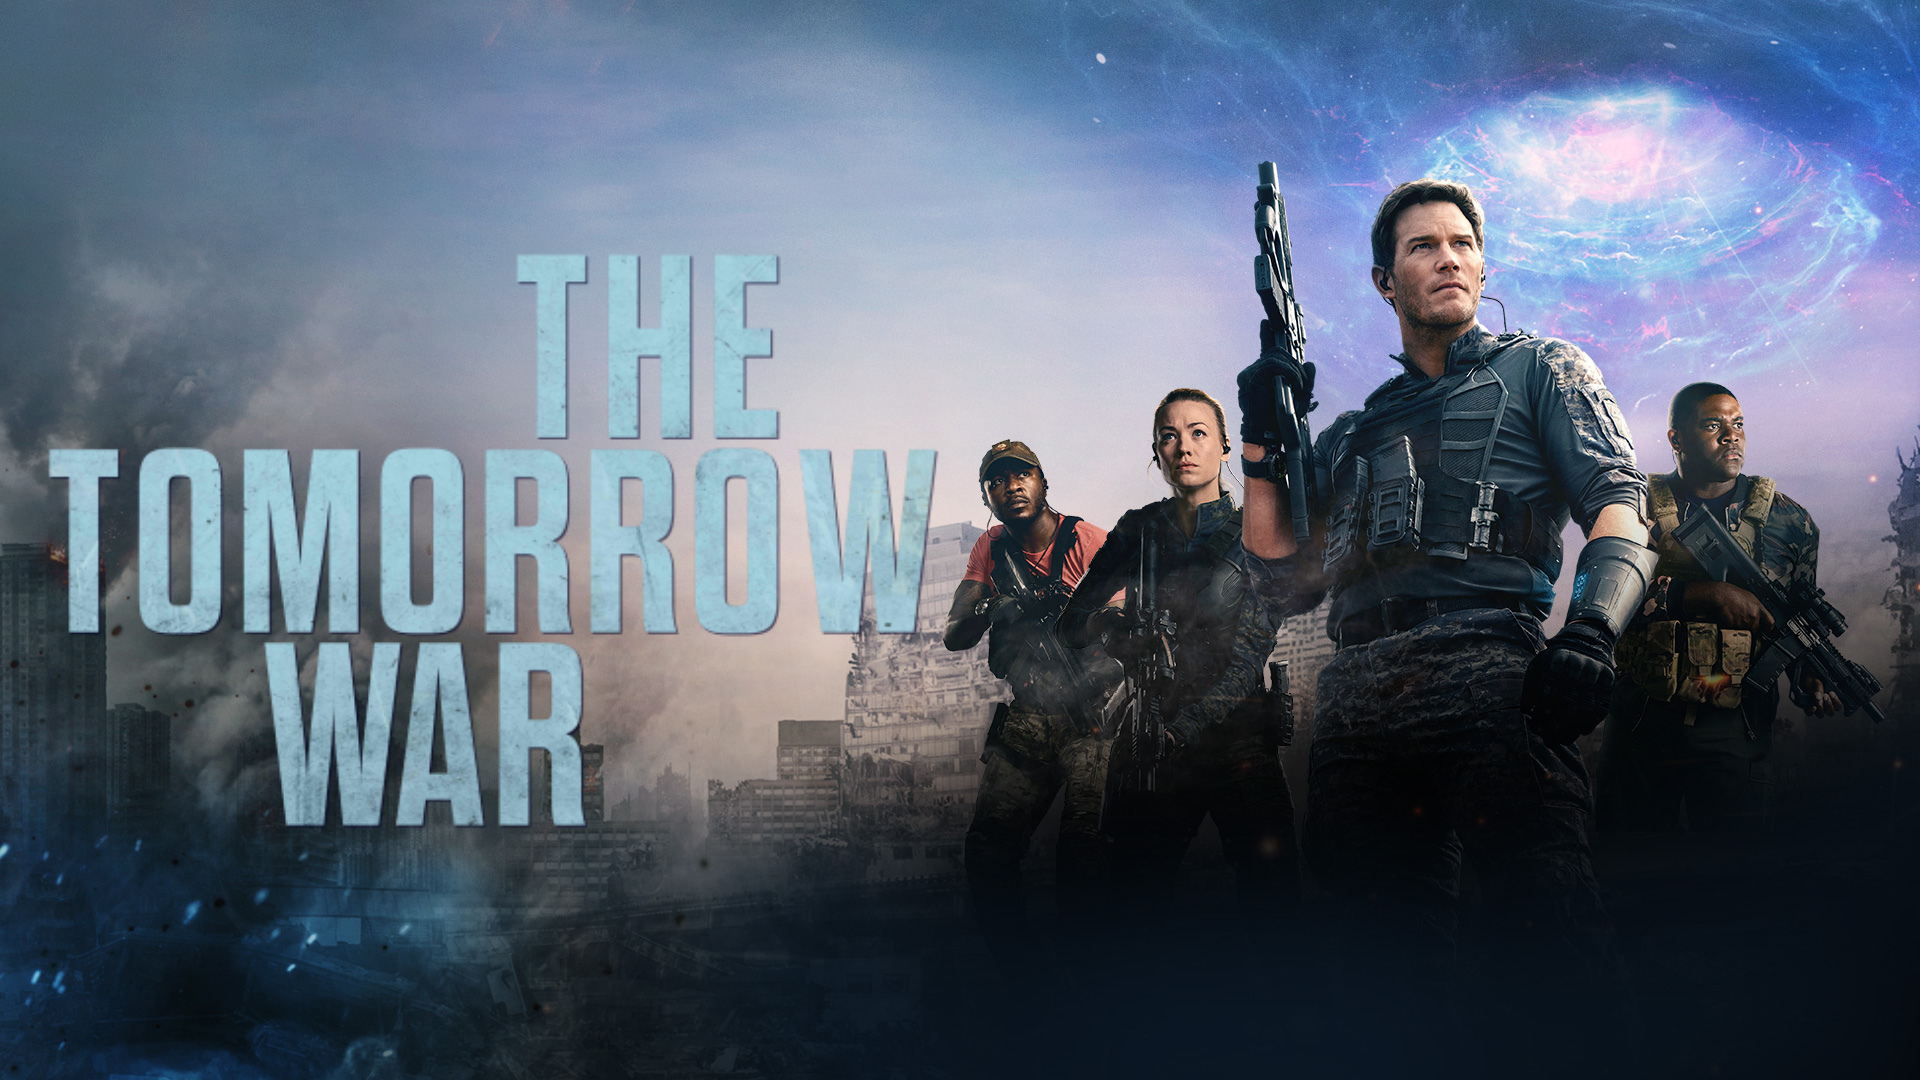 ‘The Tomorrow War’ Fails To Differentiate Itself From Similar Sci-Fi Action Epics – Review